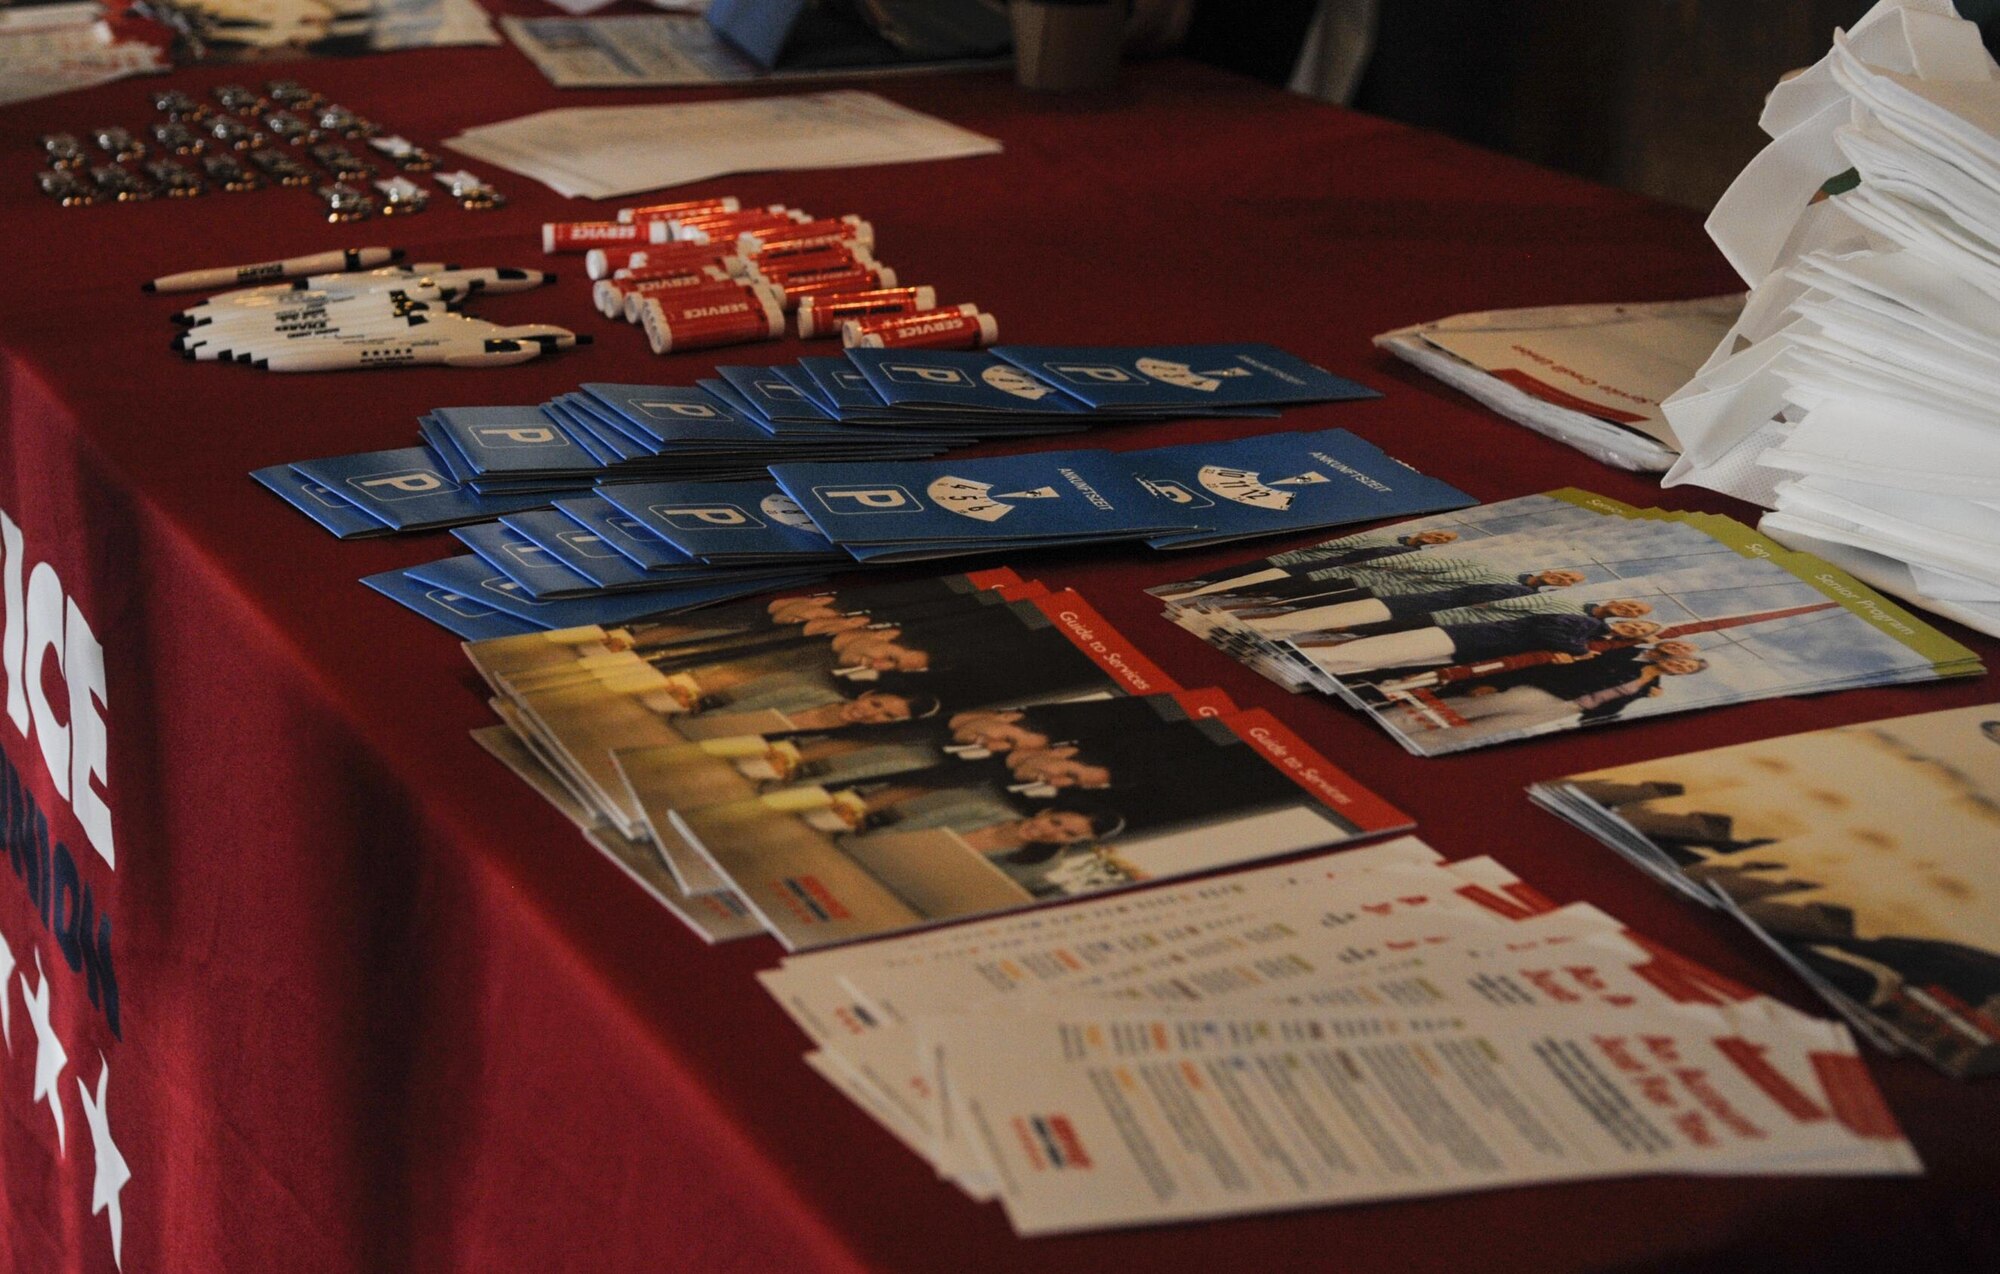 Brochures are displayed on a table during a Retiree Appreciation Week event at Ramstein Air Base, Germany, Oct. 4, 2016. Organizations throughout the Kaiserslautern Military Community provided informational and supportive services to retirees. (U.S. Air Force photo by Senior Airman Larissa Greatwood)